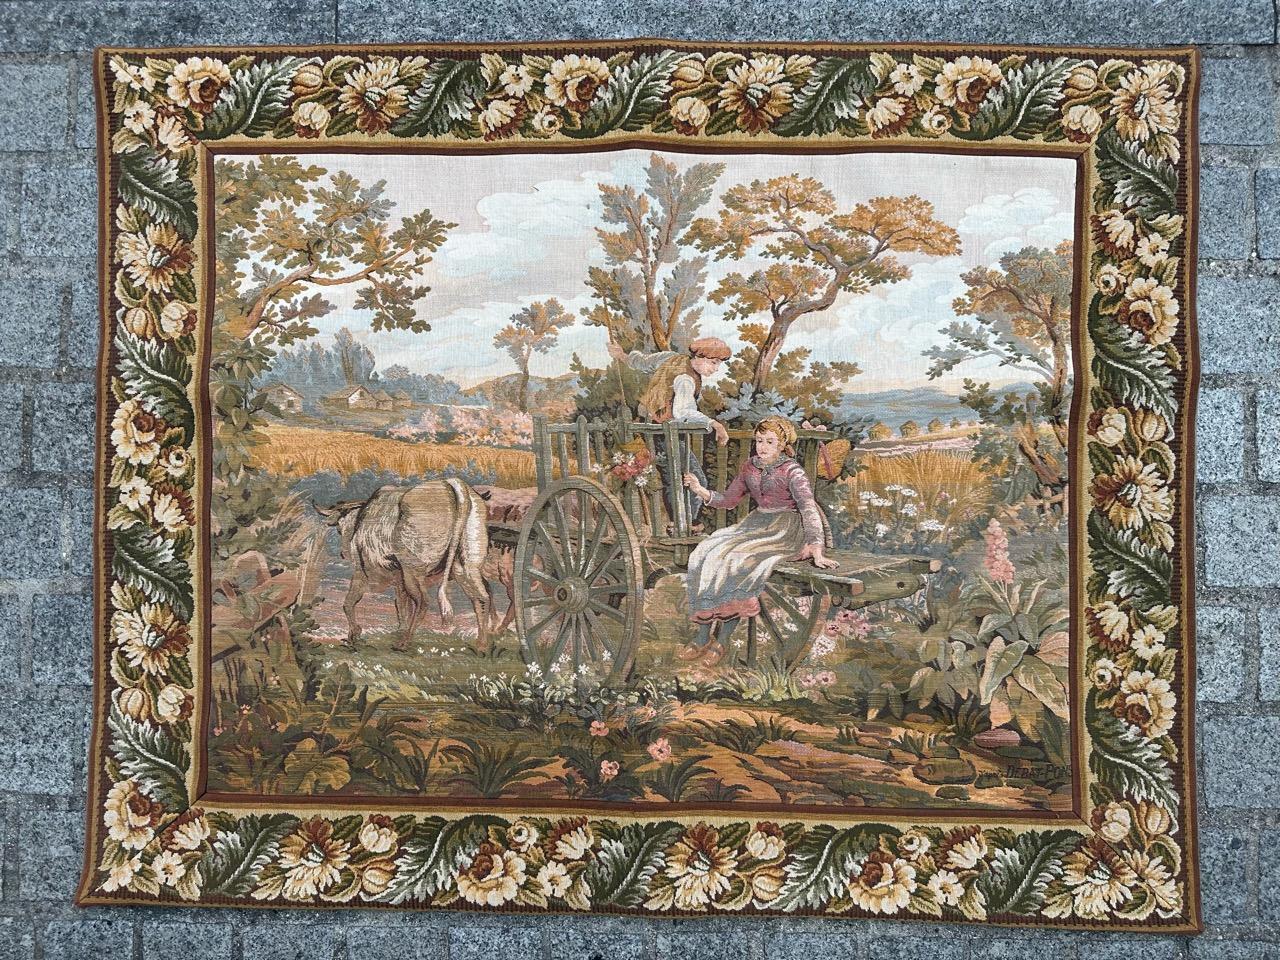 Exquisite 20th-century French tapestry featuring a charming gallant romantic design depicting a couple on a cart amidst a picturesque countryside scene. This stunning piece boasts vibrant colors and was meticulously woven using a Jaquar mechanical